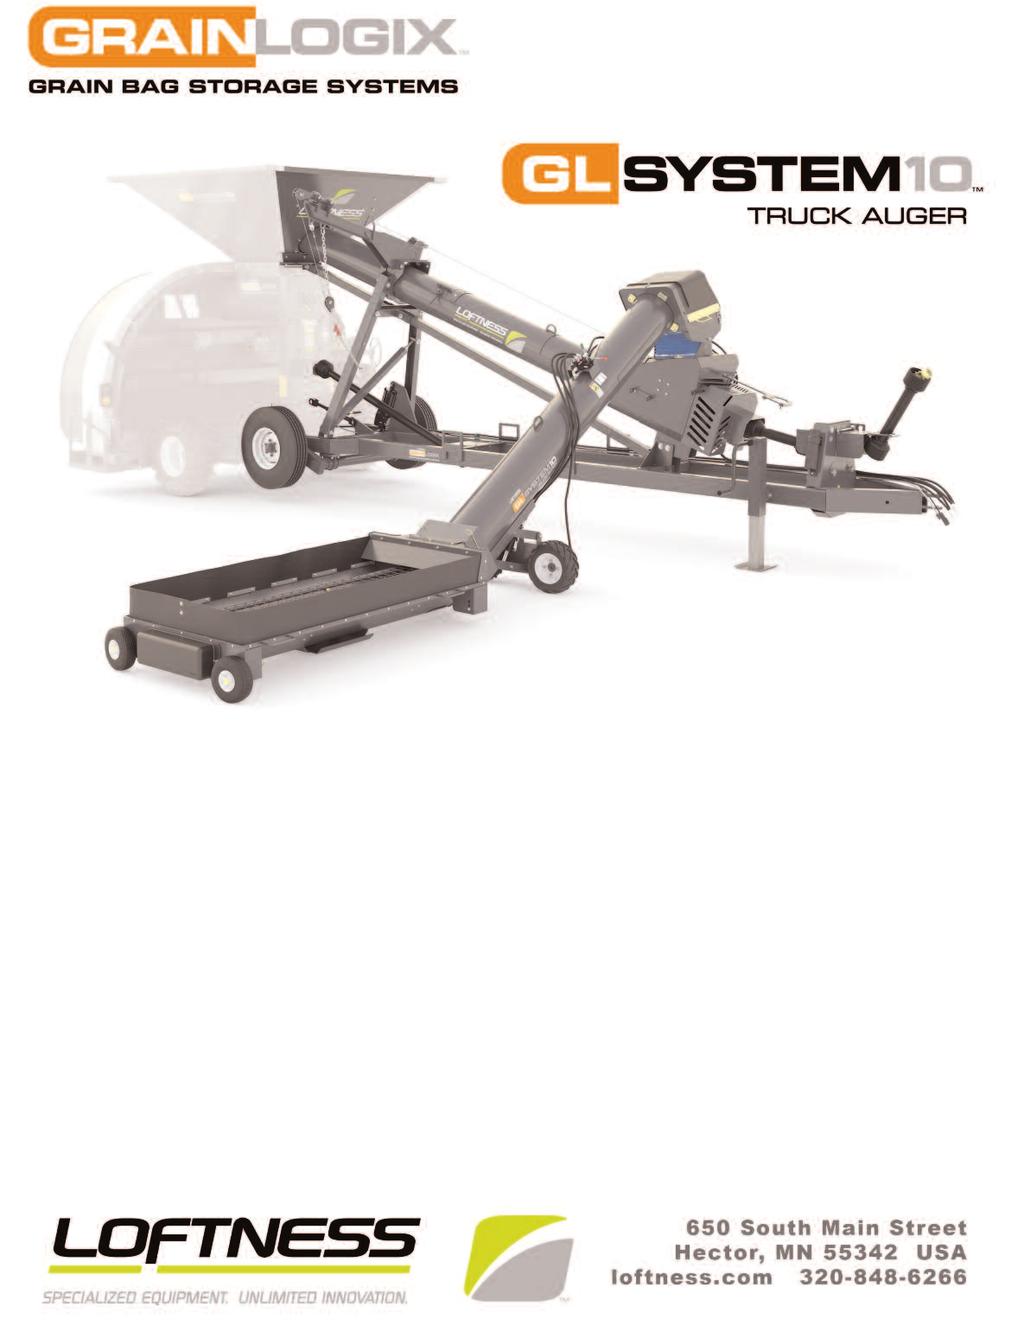 L10032 - Printed 9.15.15 - Prices Effective 11.1.14 Subject to Change - USD - FOB Factory Grain Bag Loader - Truck Auger Option l Hopper Lift Winch Options l Hydraulic Transport Option l PTO Driven